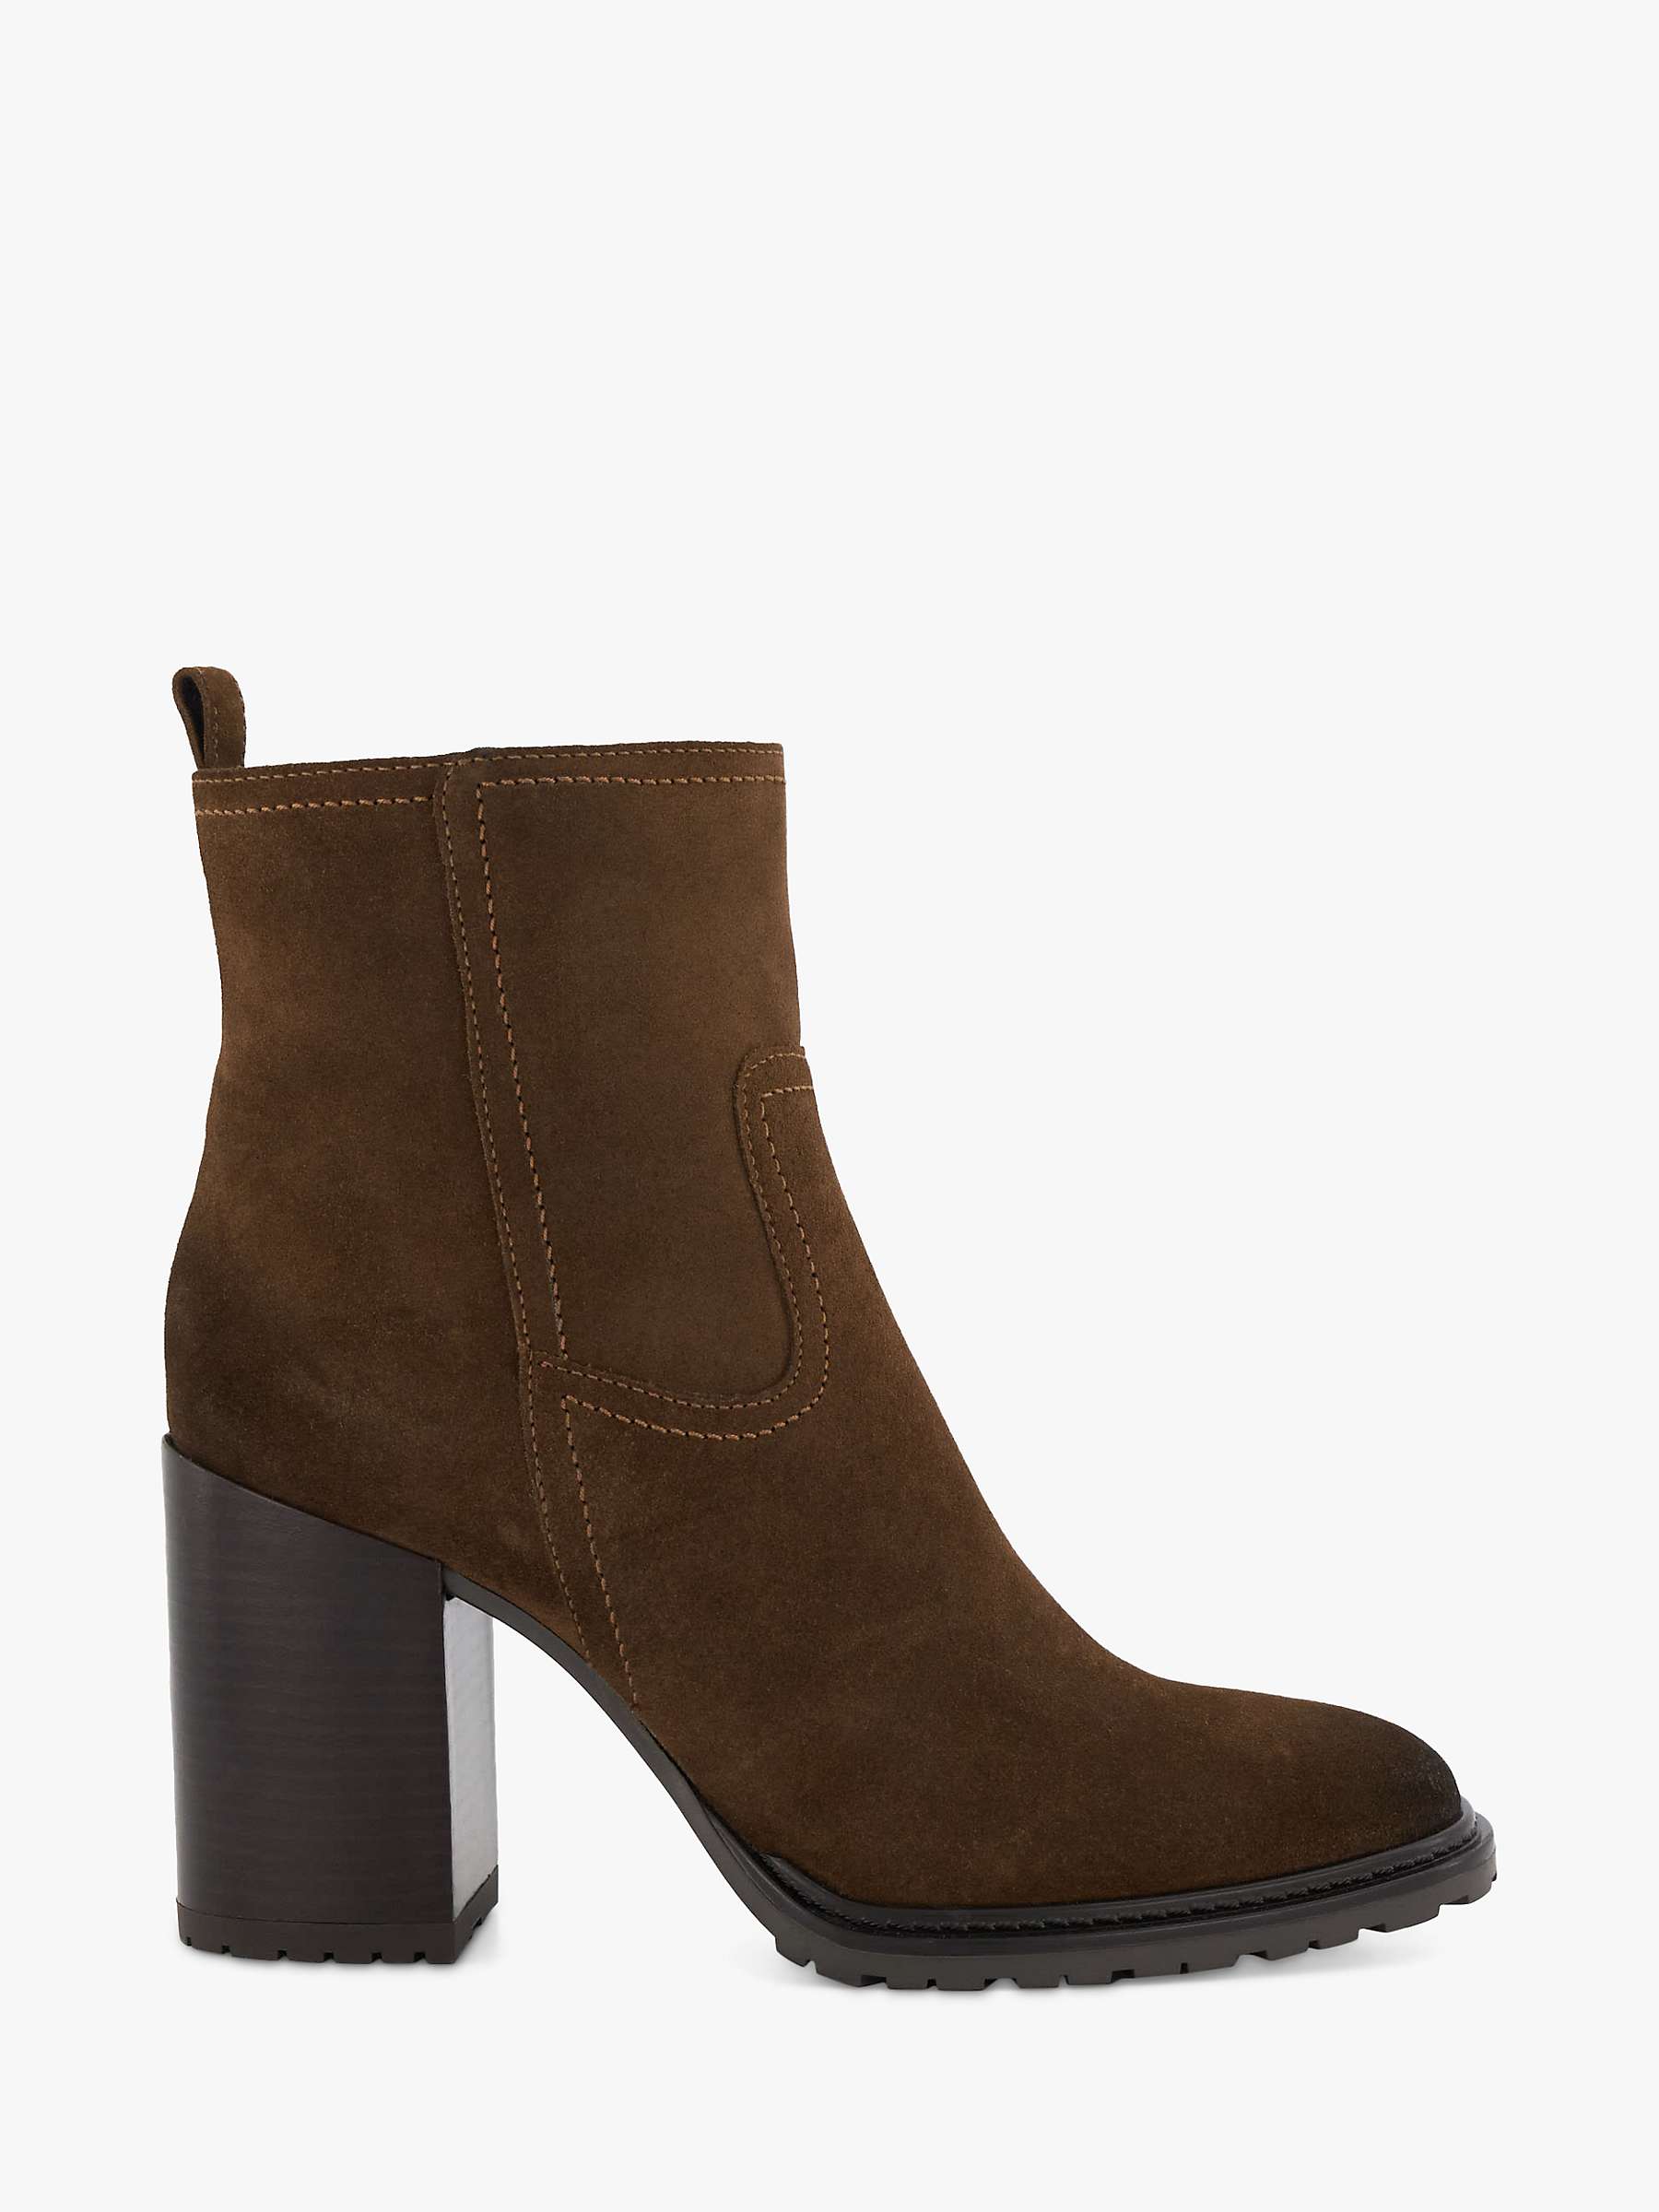 Buy Dune Peng Suede Heeled Ankle Boots Online at johnlewis.com